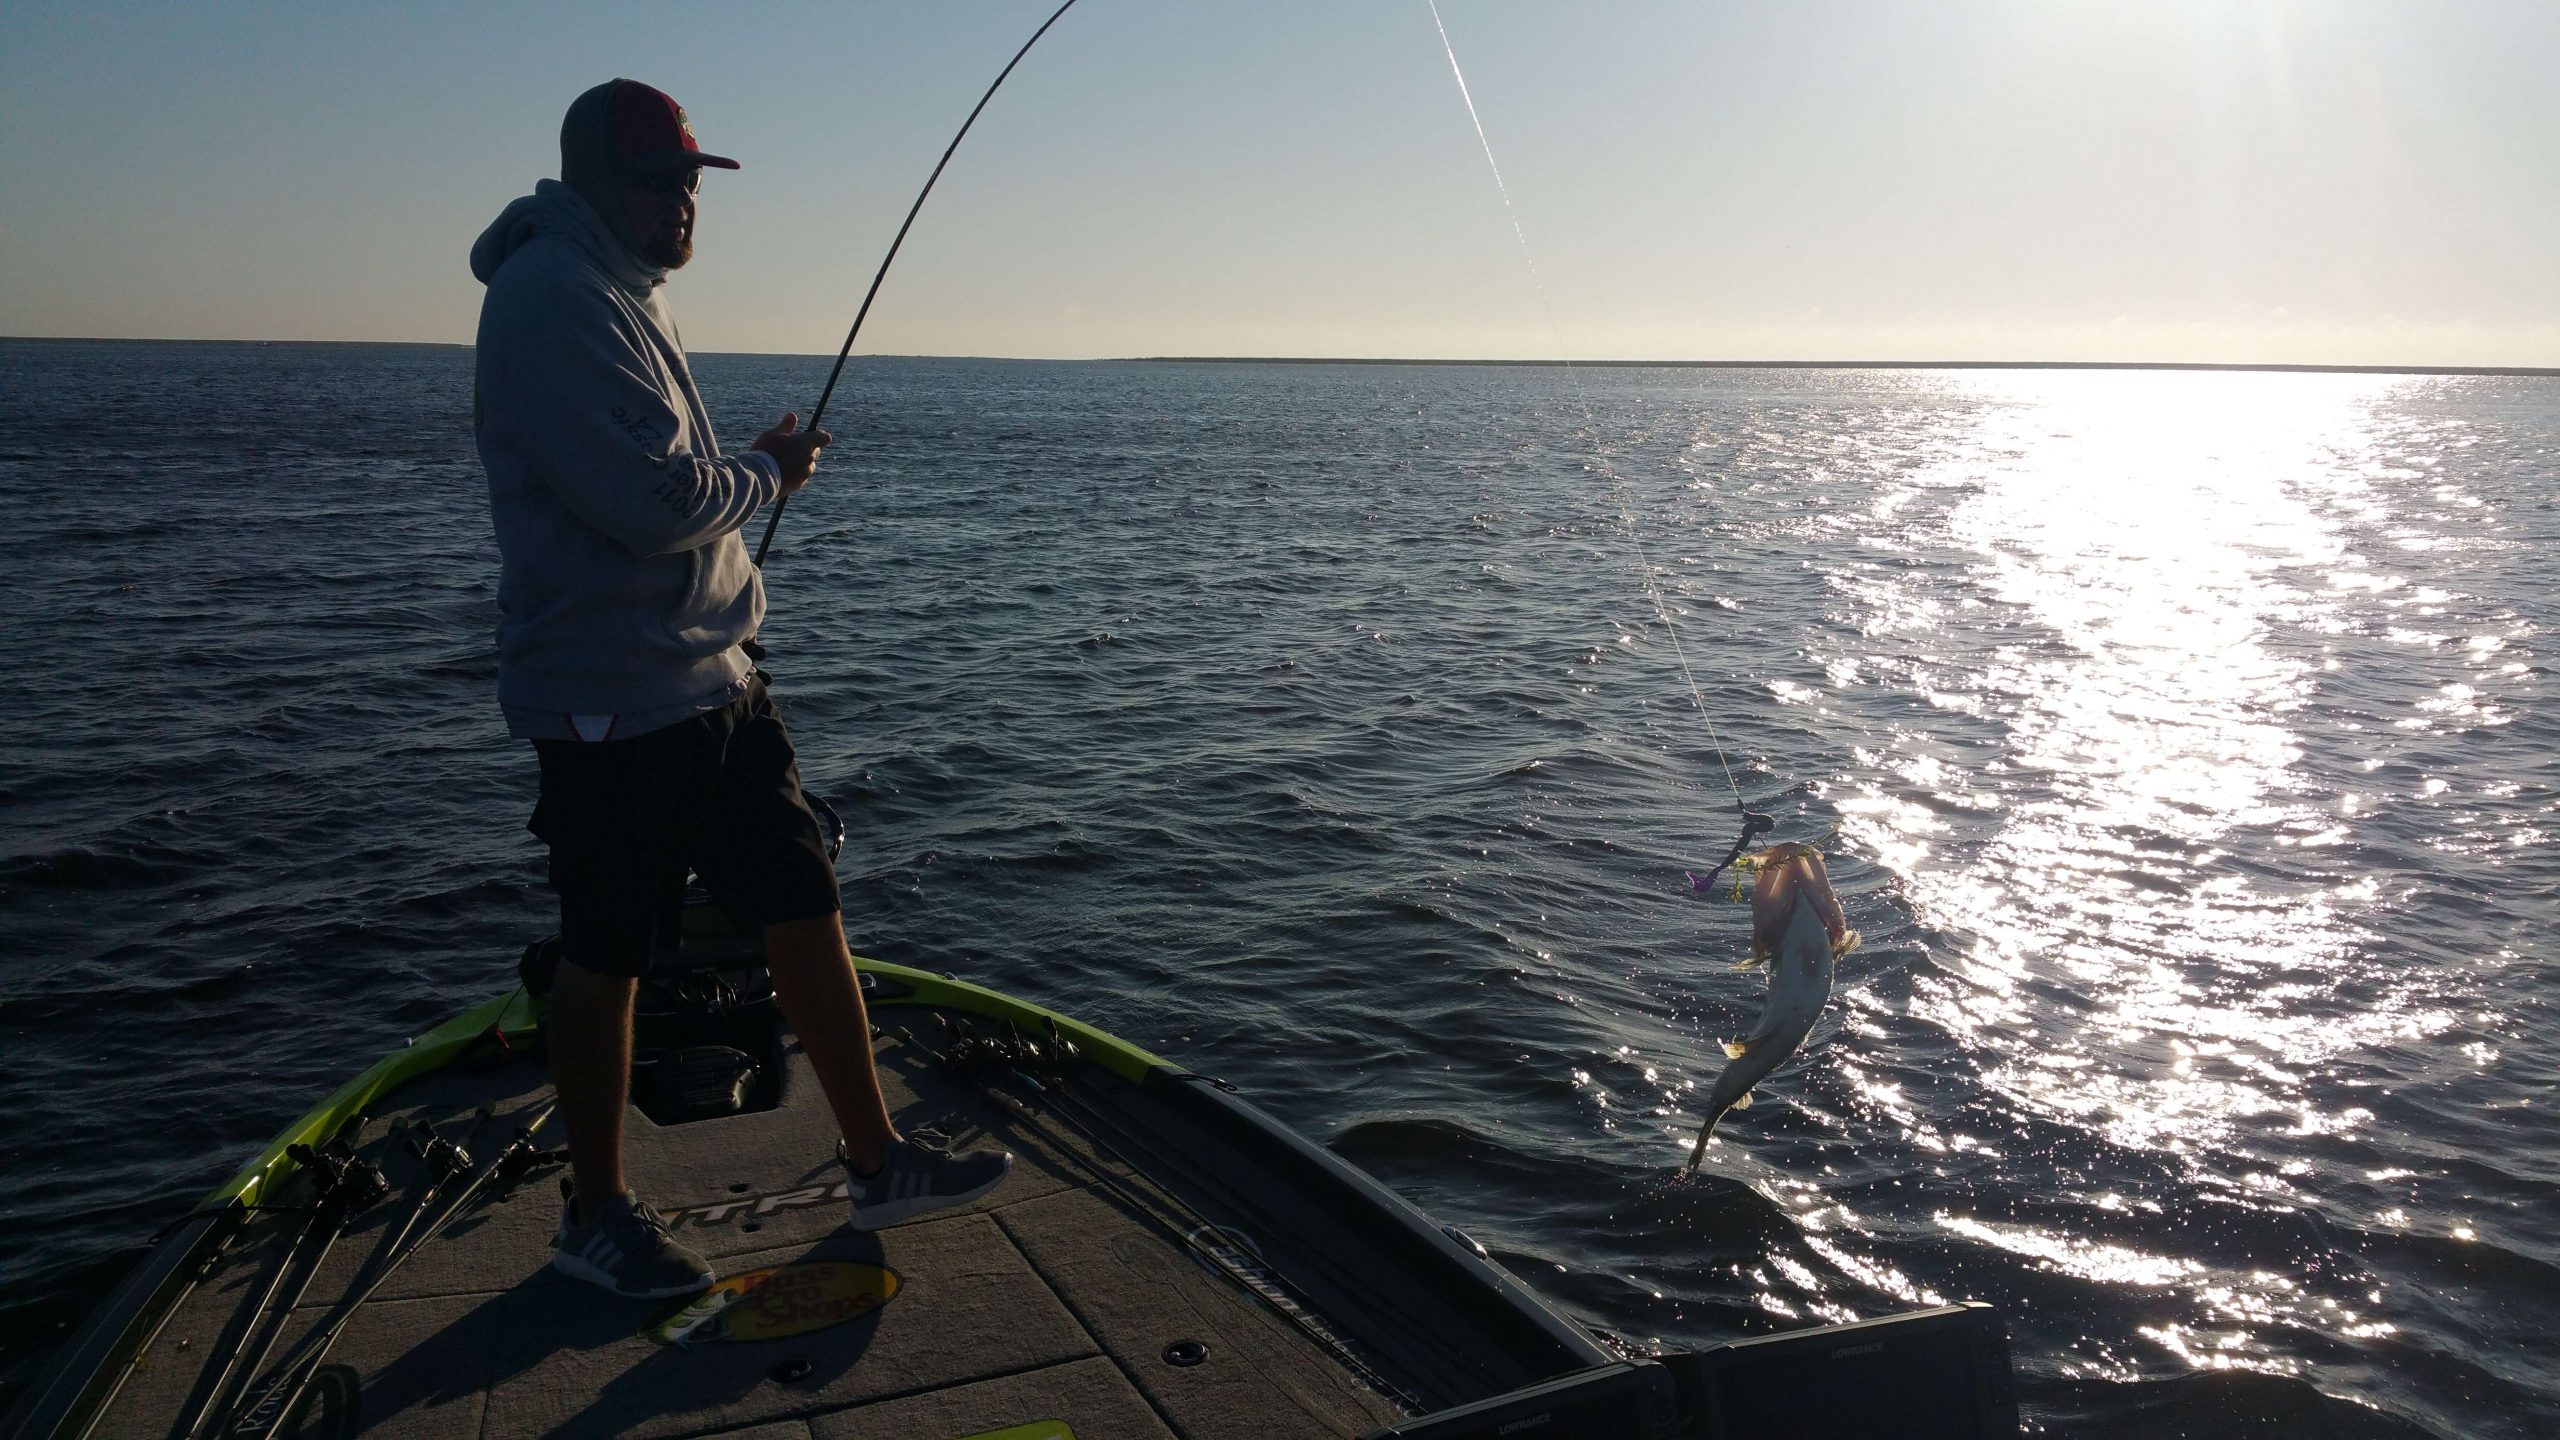 Williamson is on the board with his first keeper out here on breezy Okeechobee today.
